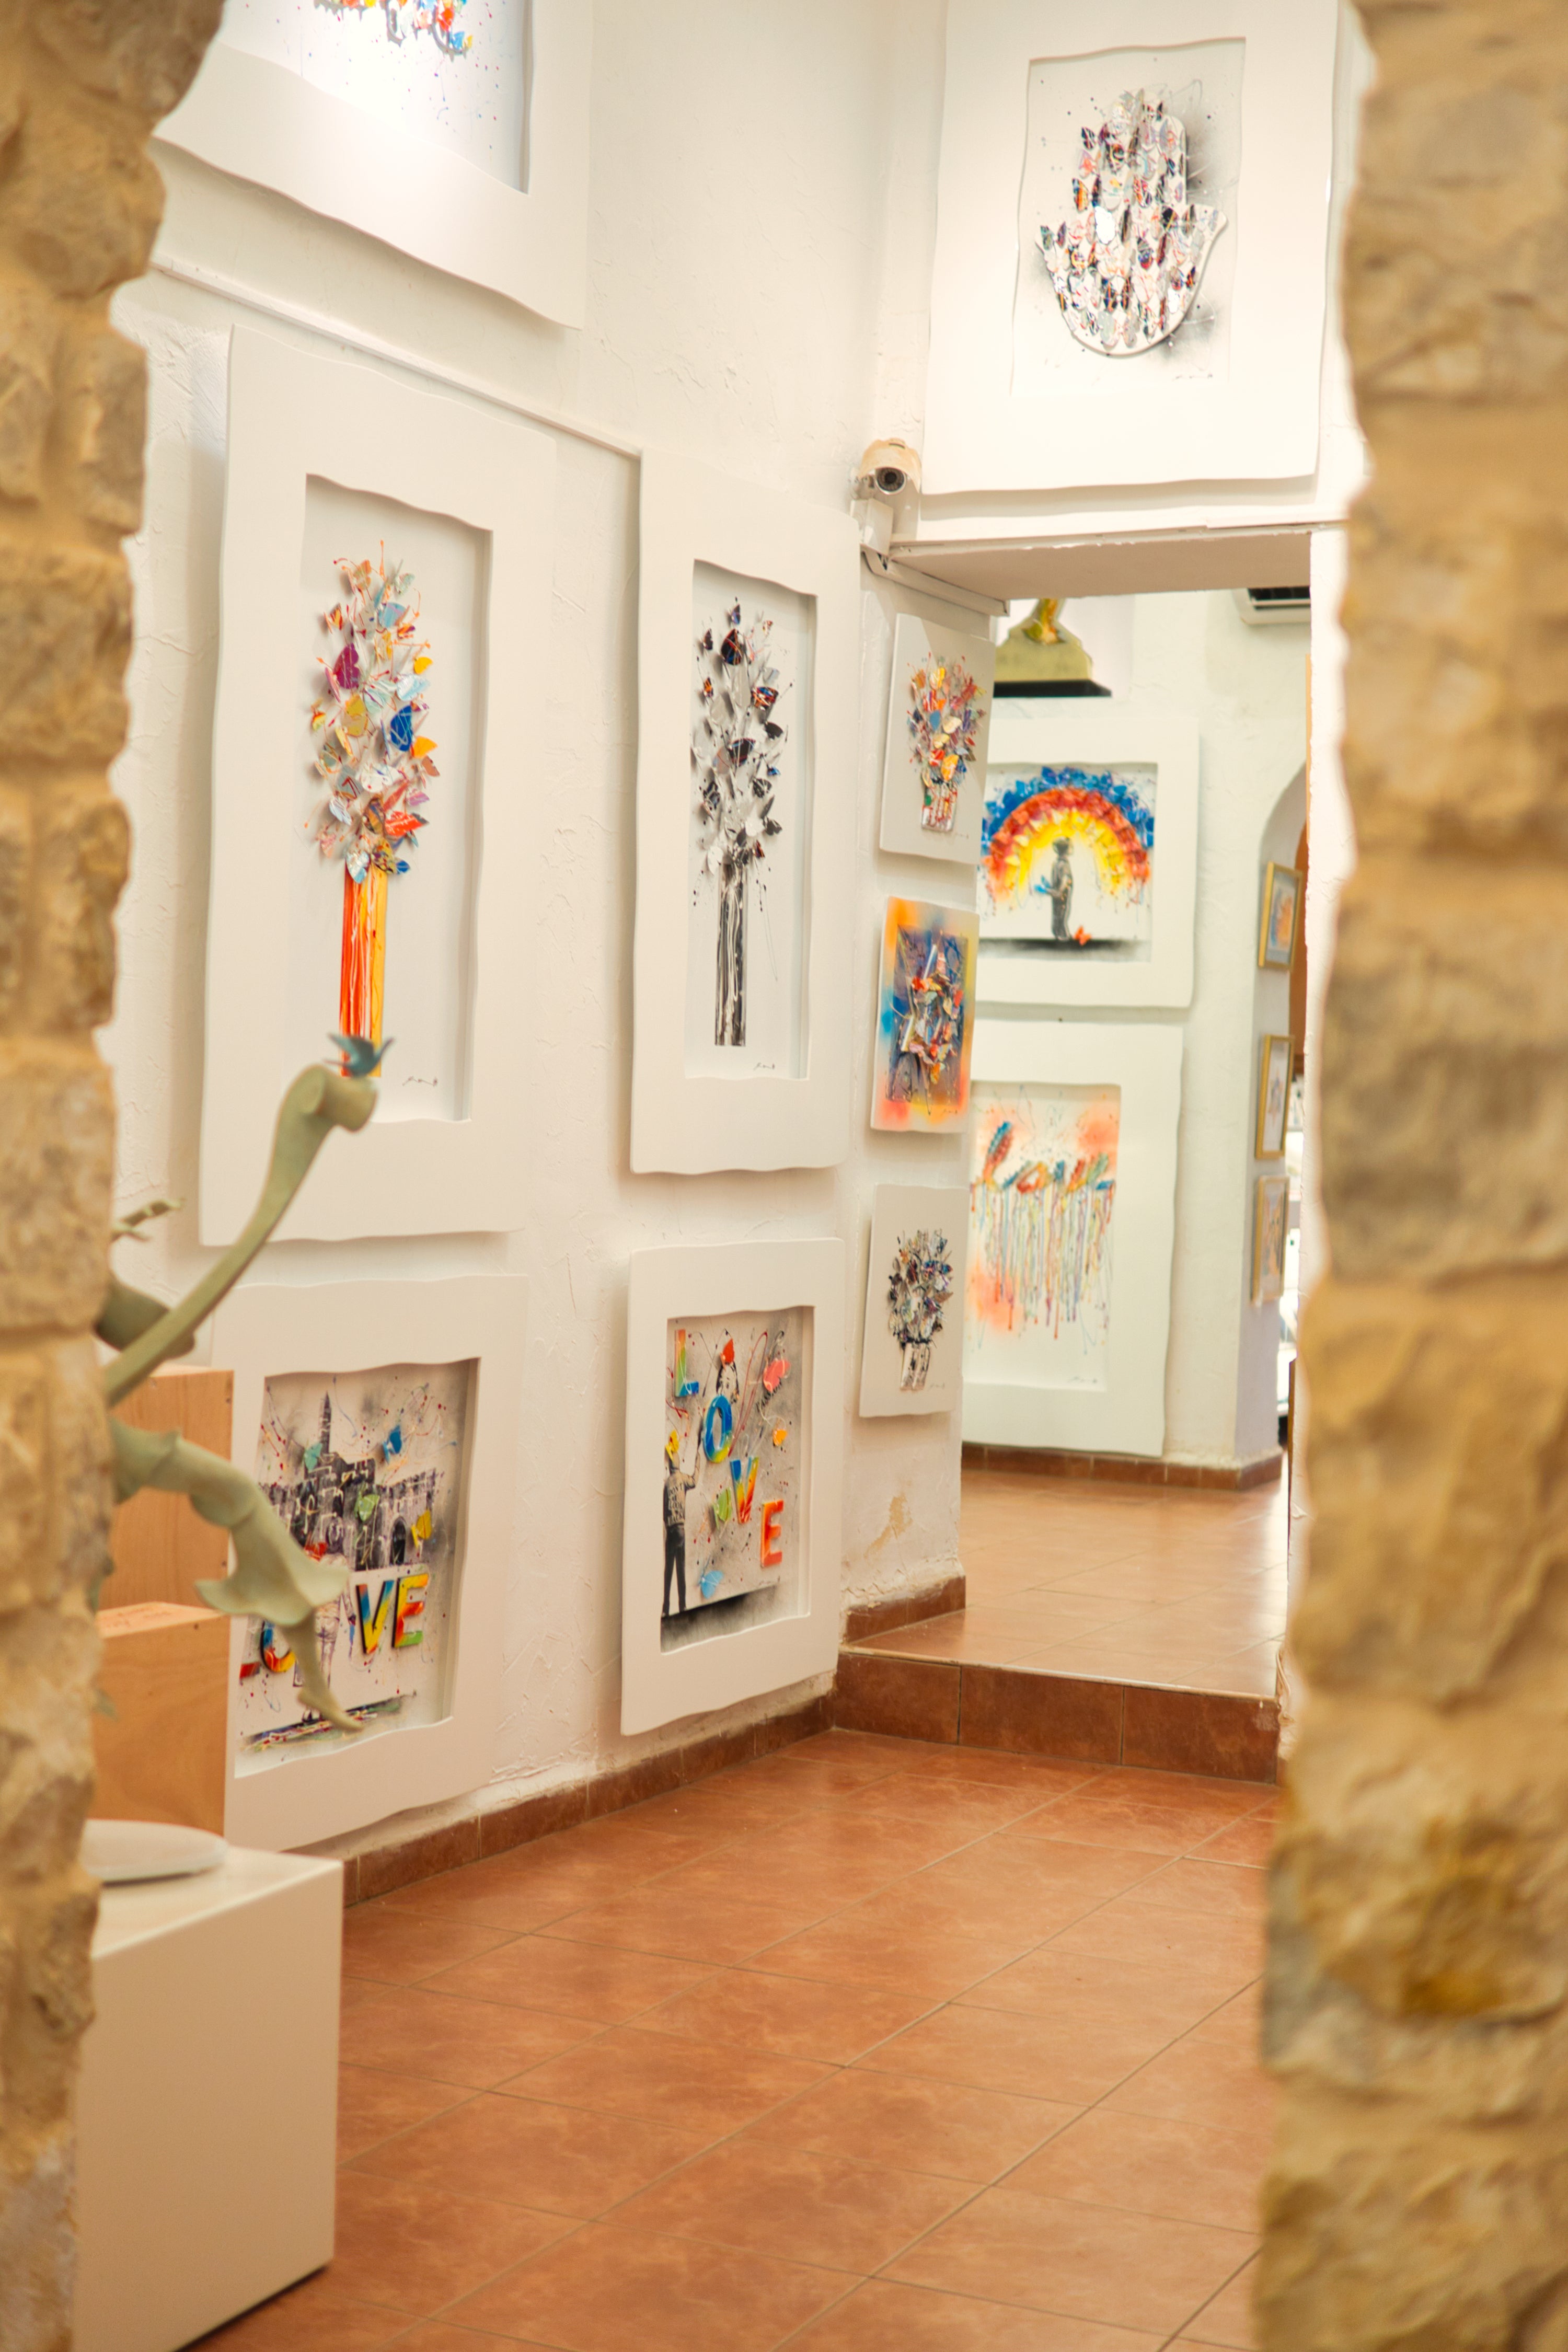 Nonna Gallery and the artworks